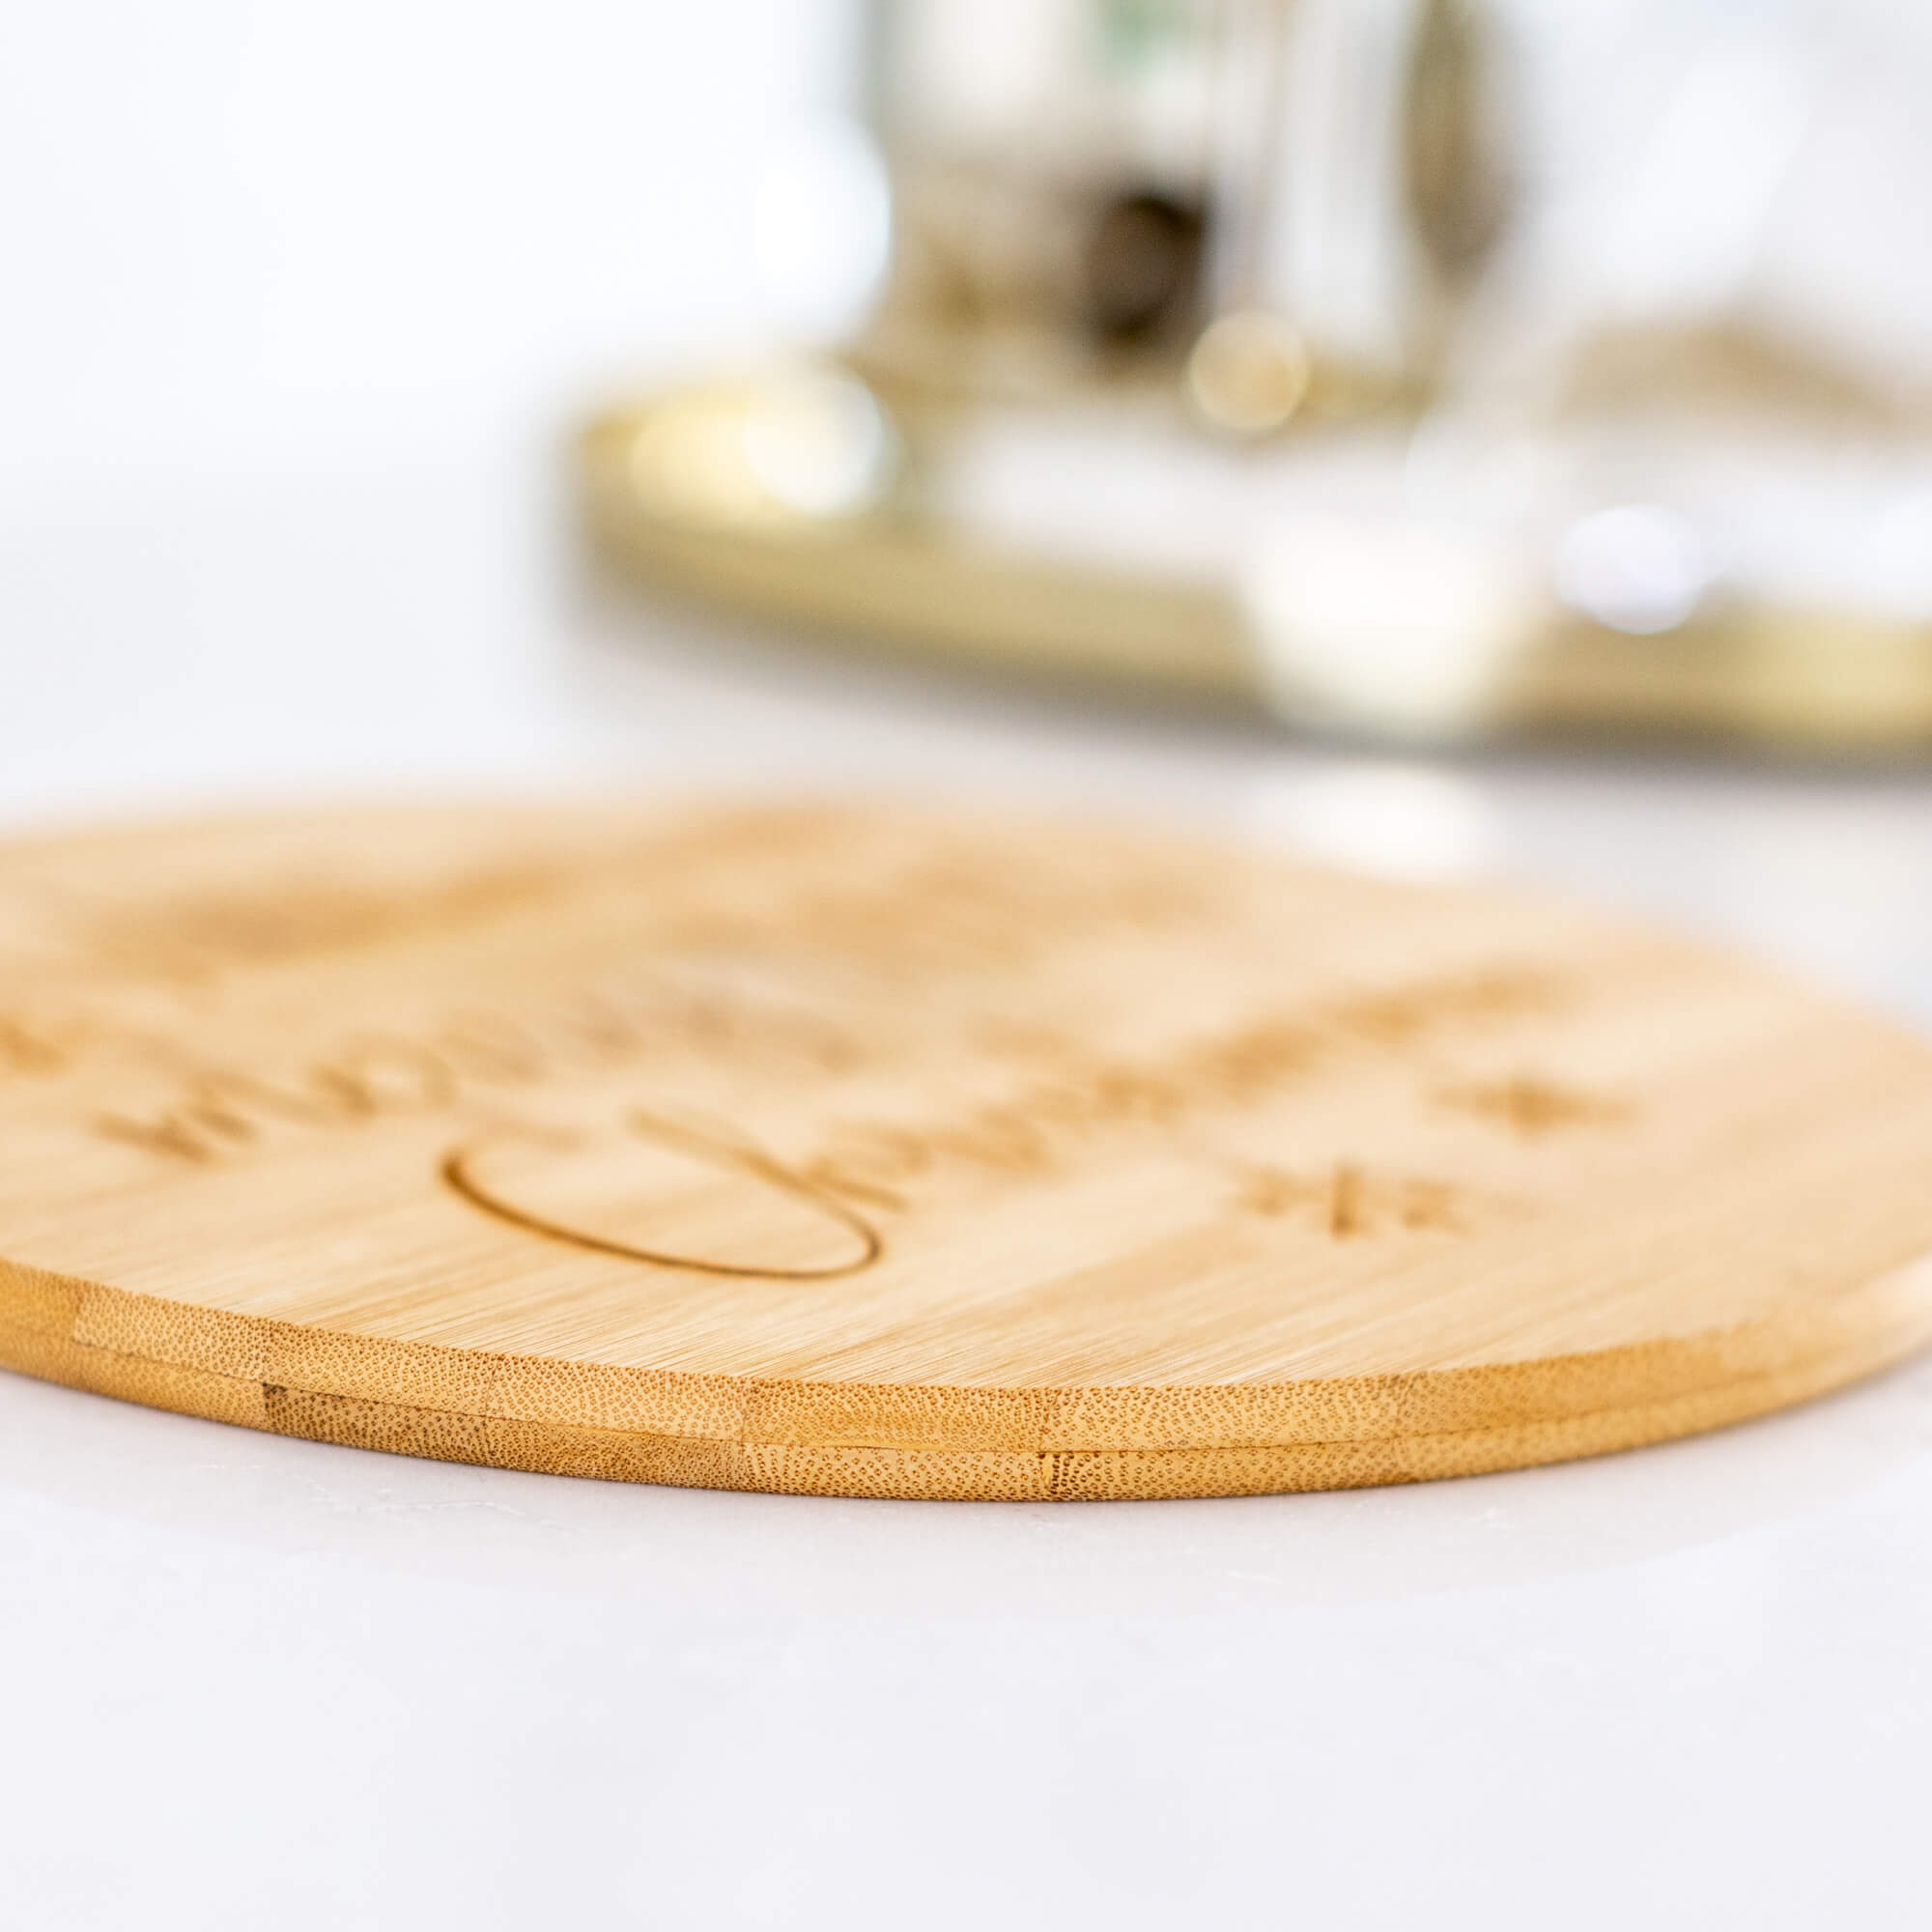 Have Yourself a Merry Little Christmas - Round Bamboo Serving Board